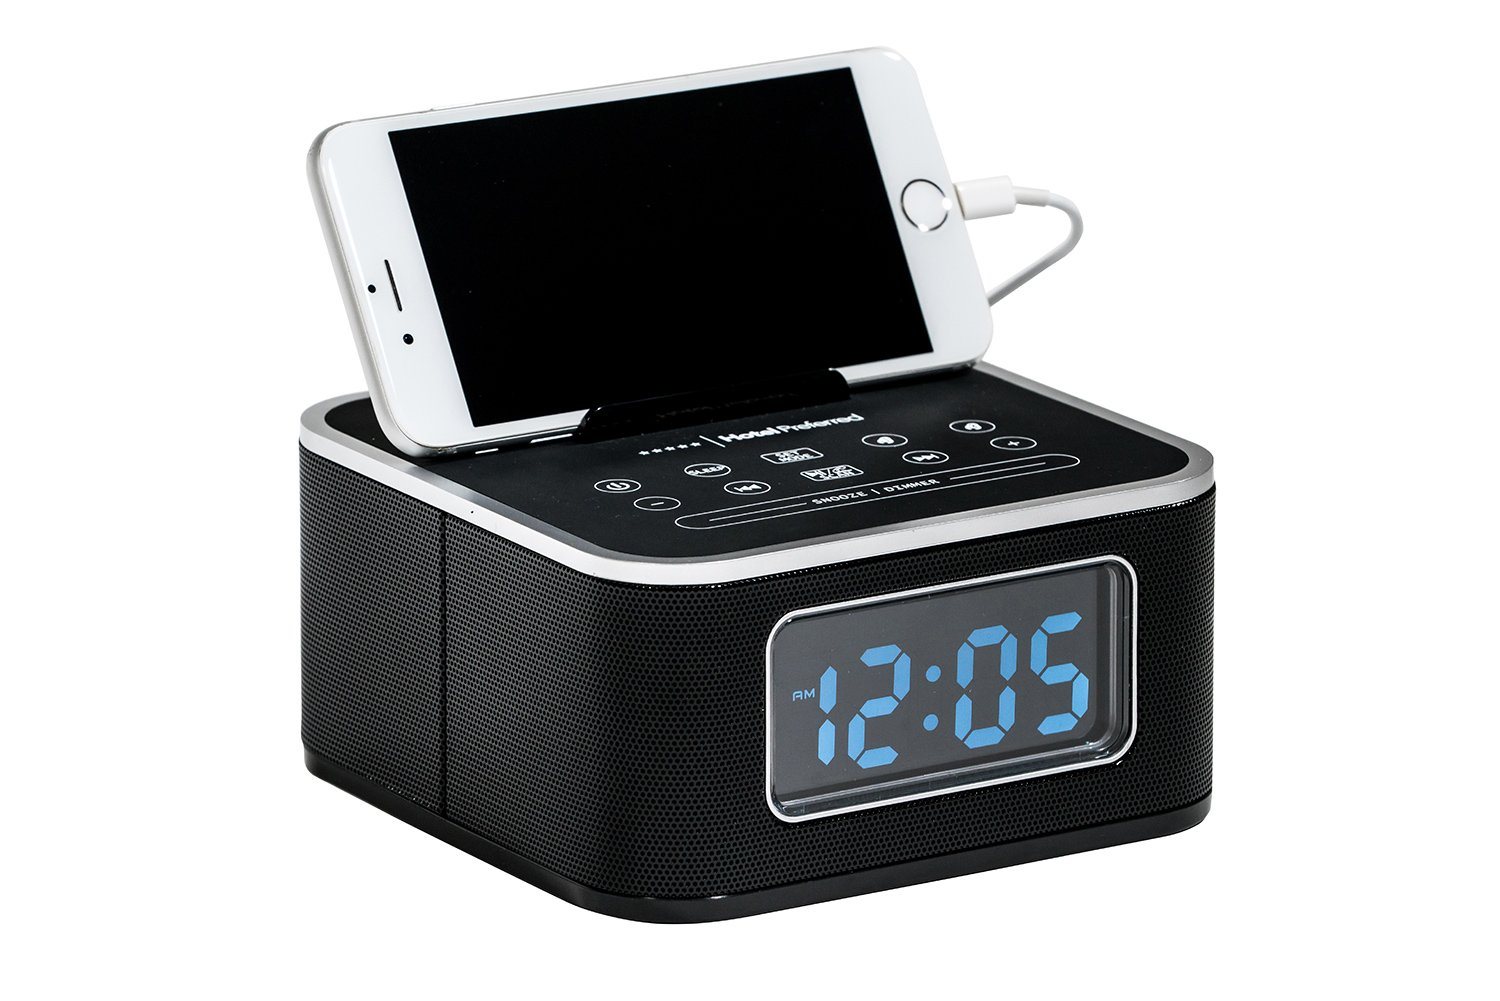 Electronics & Appliances - HPCLKR02 Alarm Clock With Charging Station